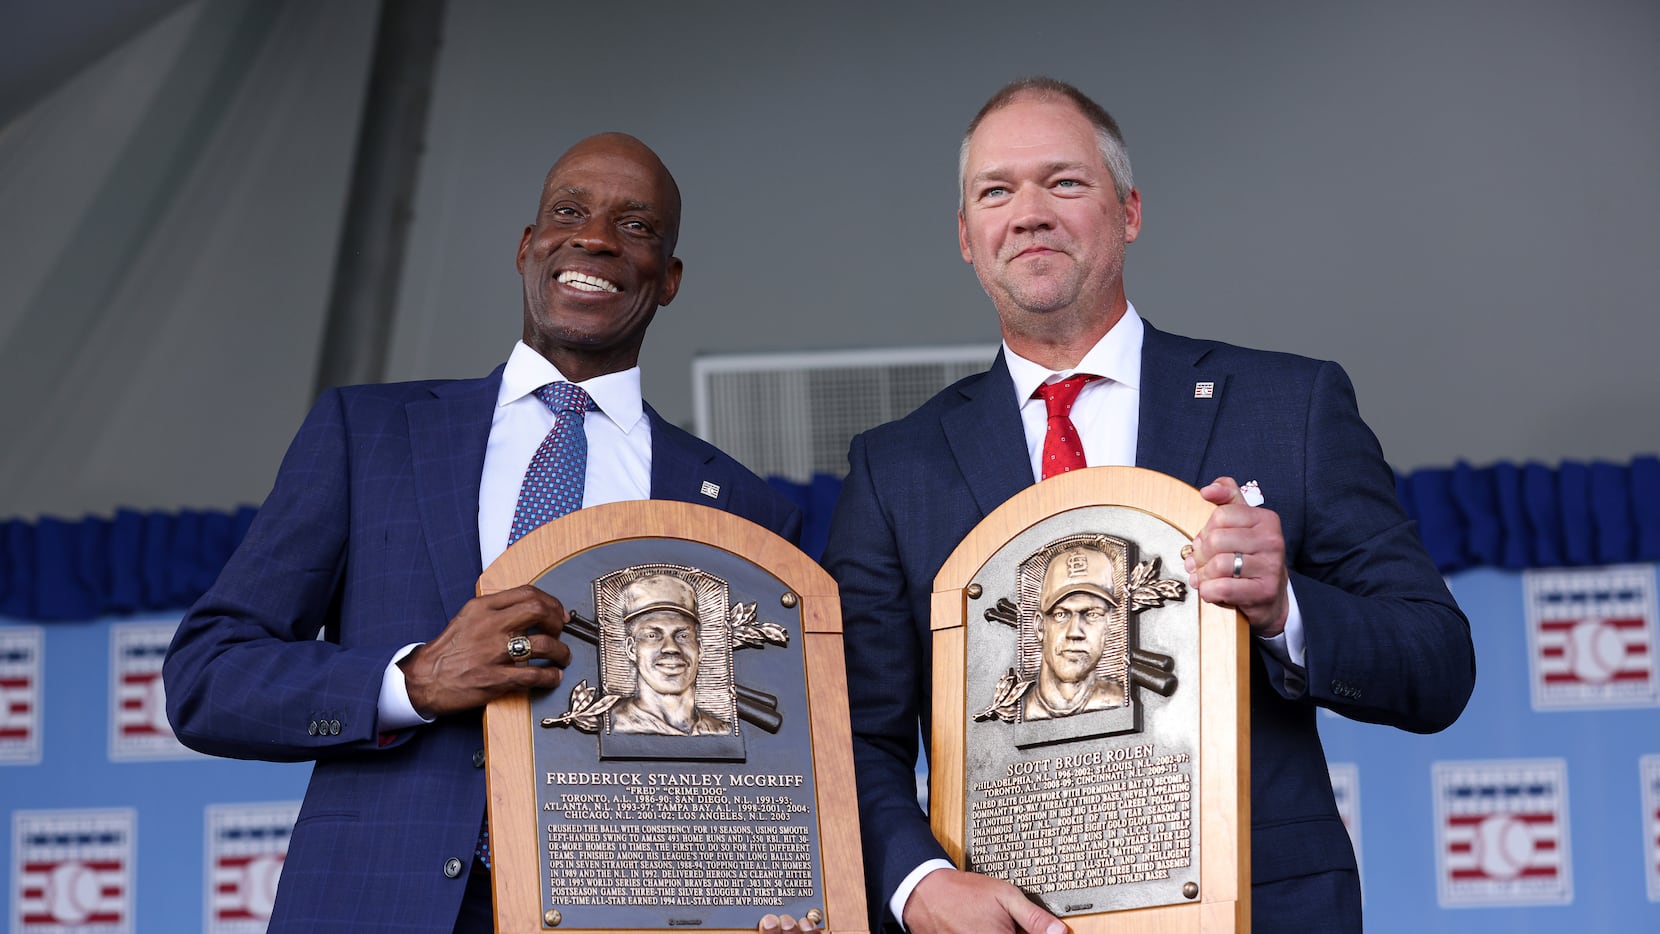 MLB greats Scott Rolen, Fred McGriff inducted into Baseball Hall